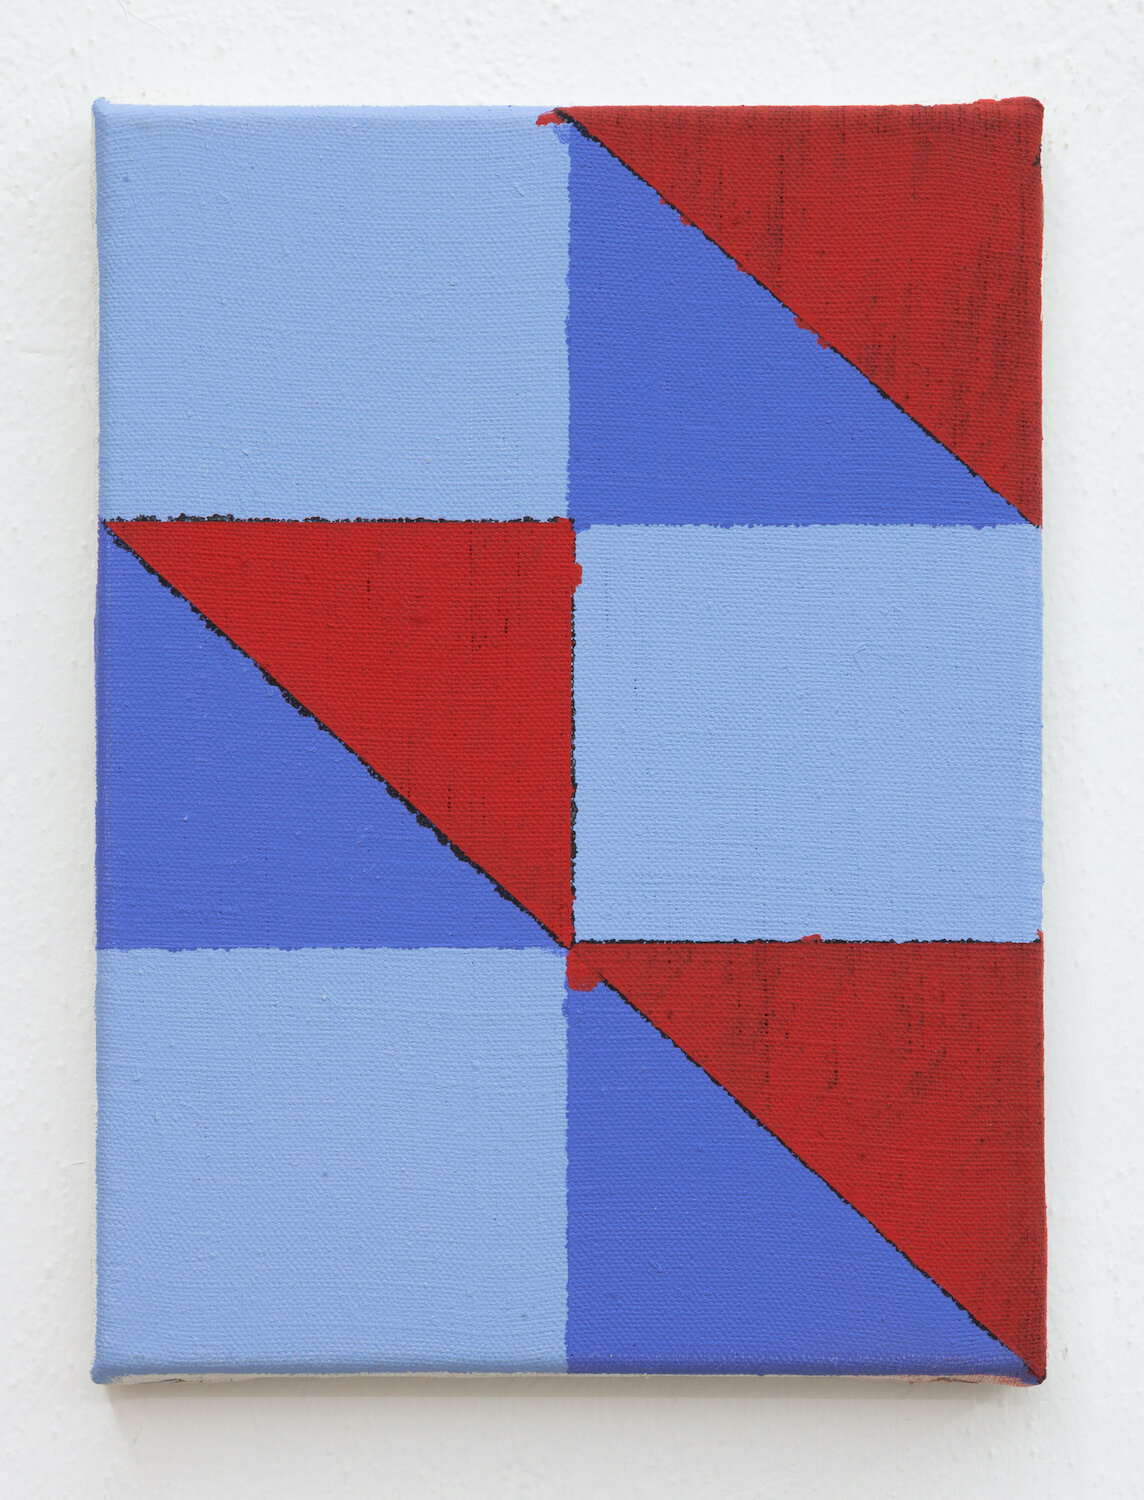  Joshua Abelow,  Untitled (Abstraction “HDD”) , 2019, Oil on linen, 12 x 9 inches 